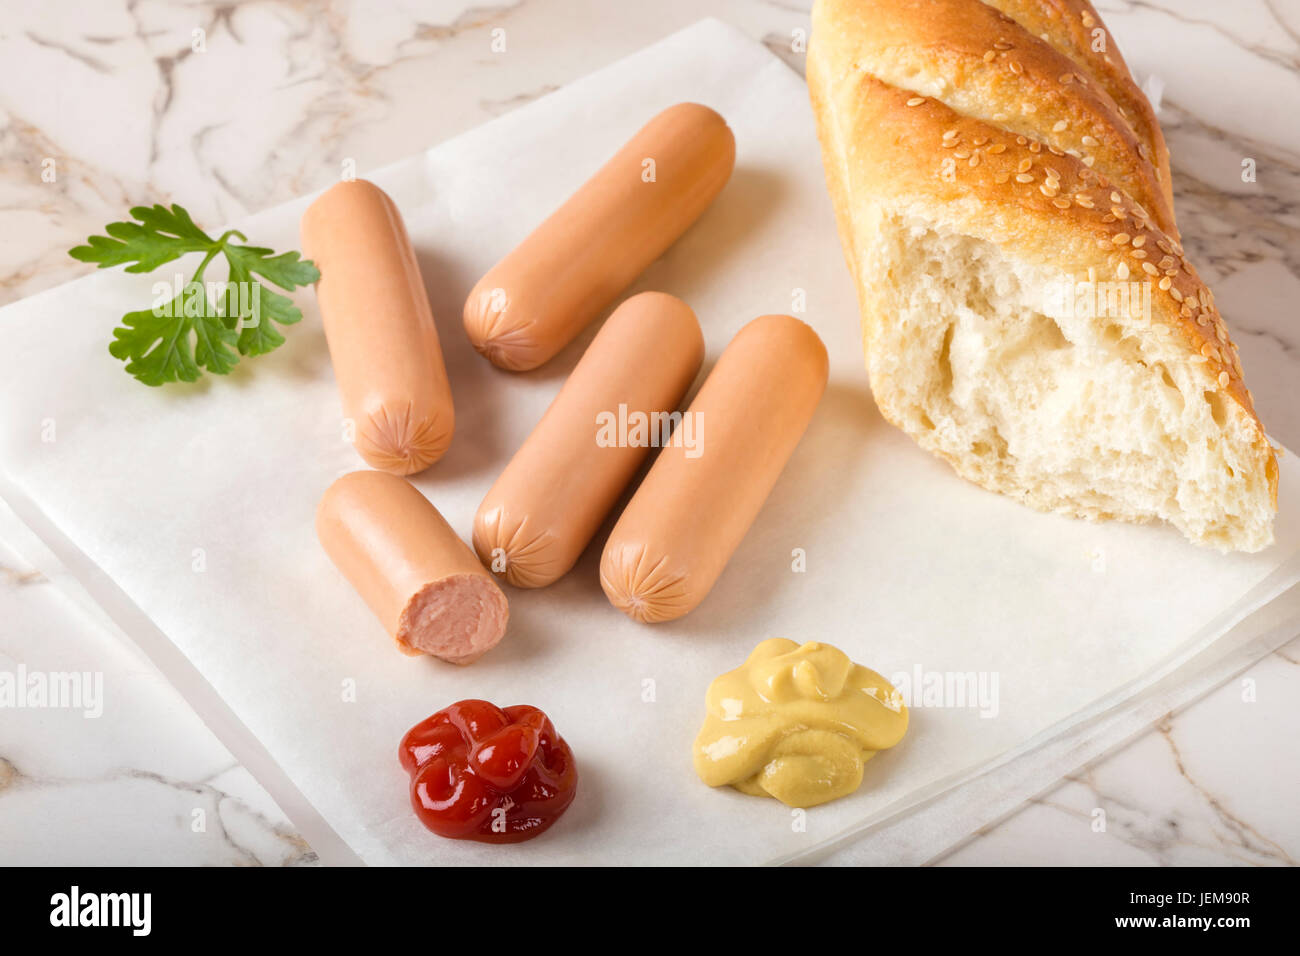 Sausages (Frankfurter) on rustic table with bread, mustard and ketchup Stock Photo